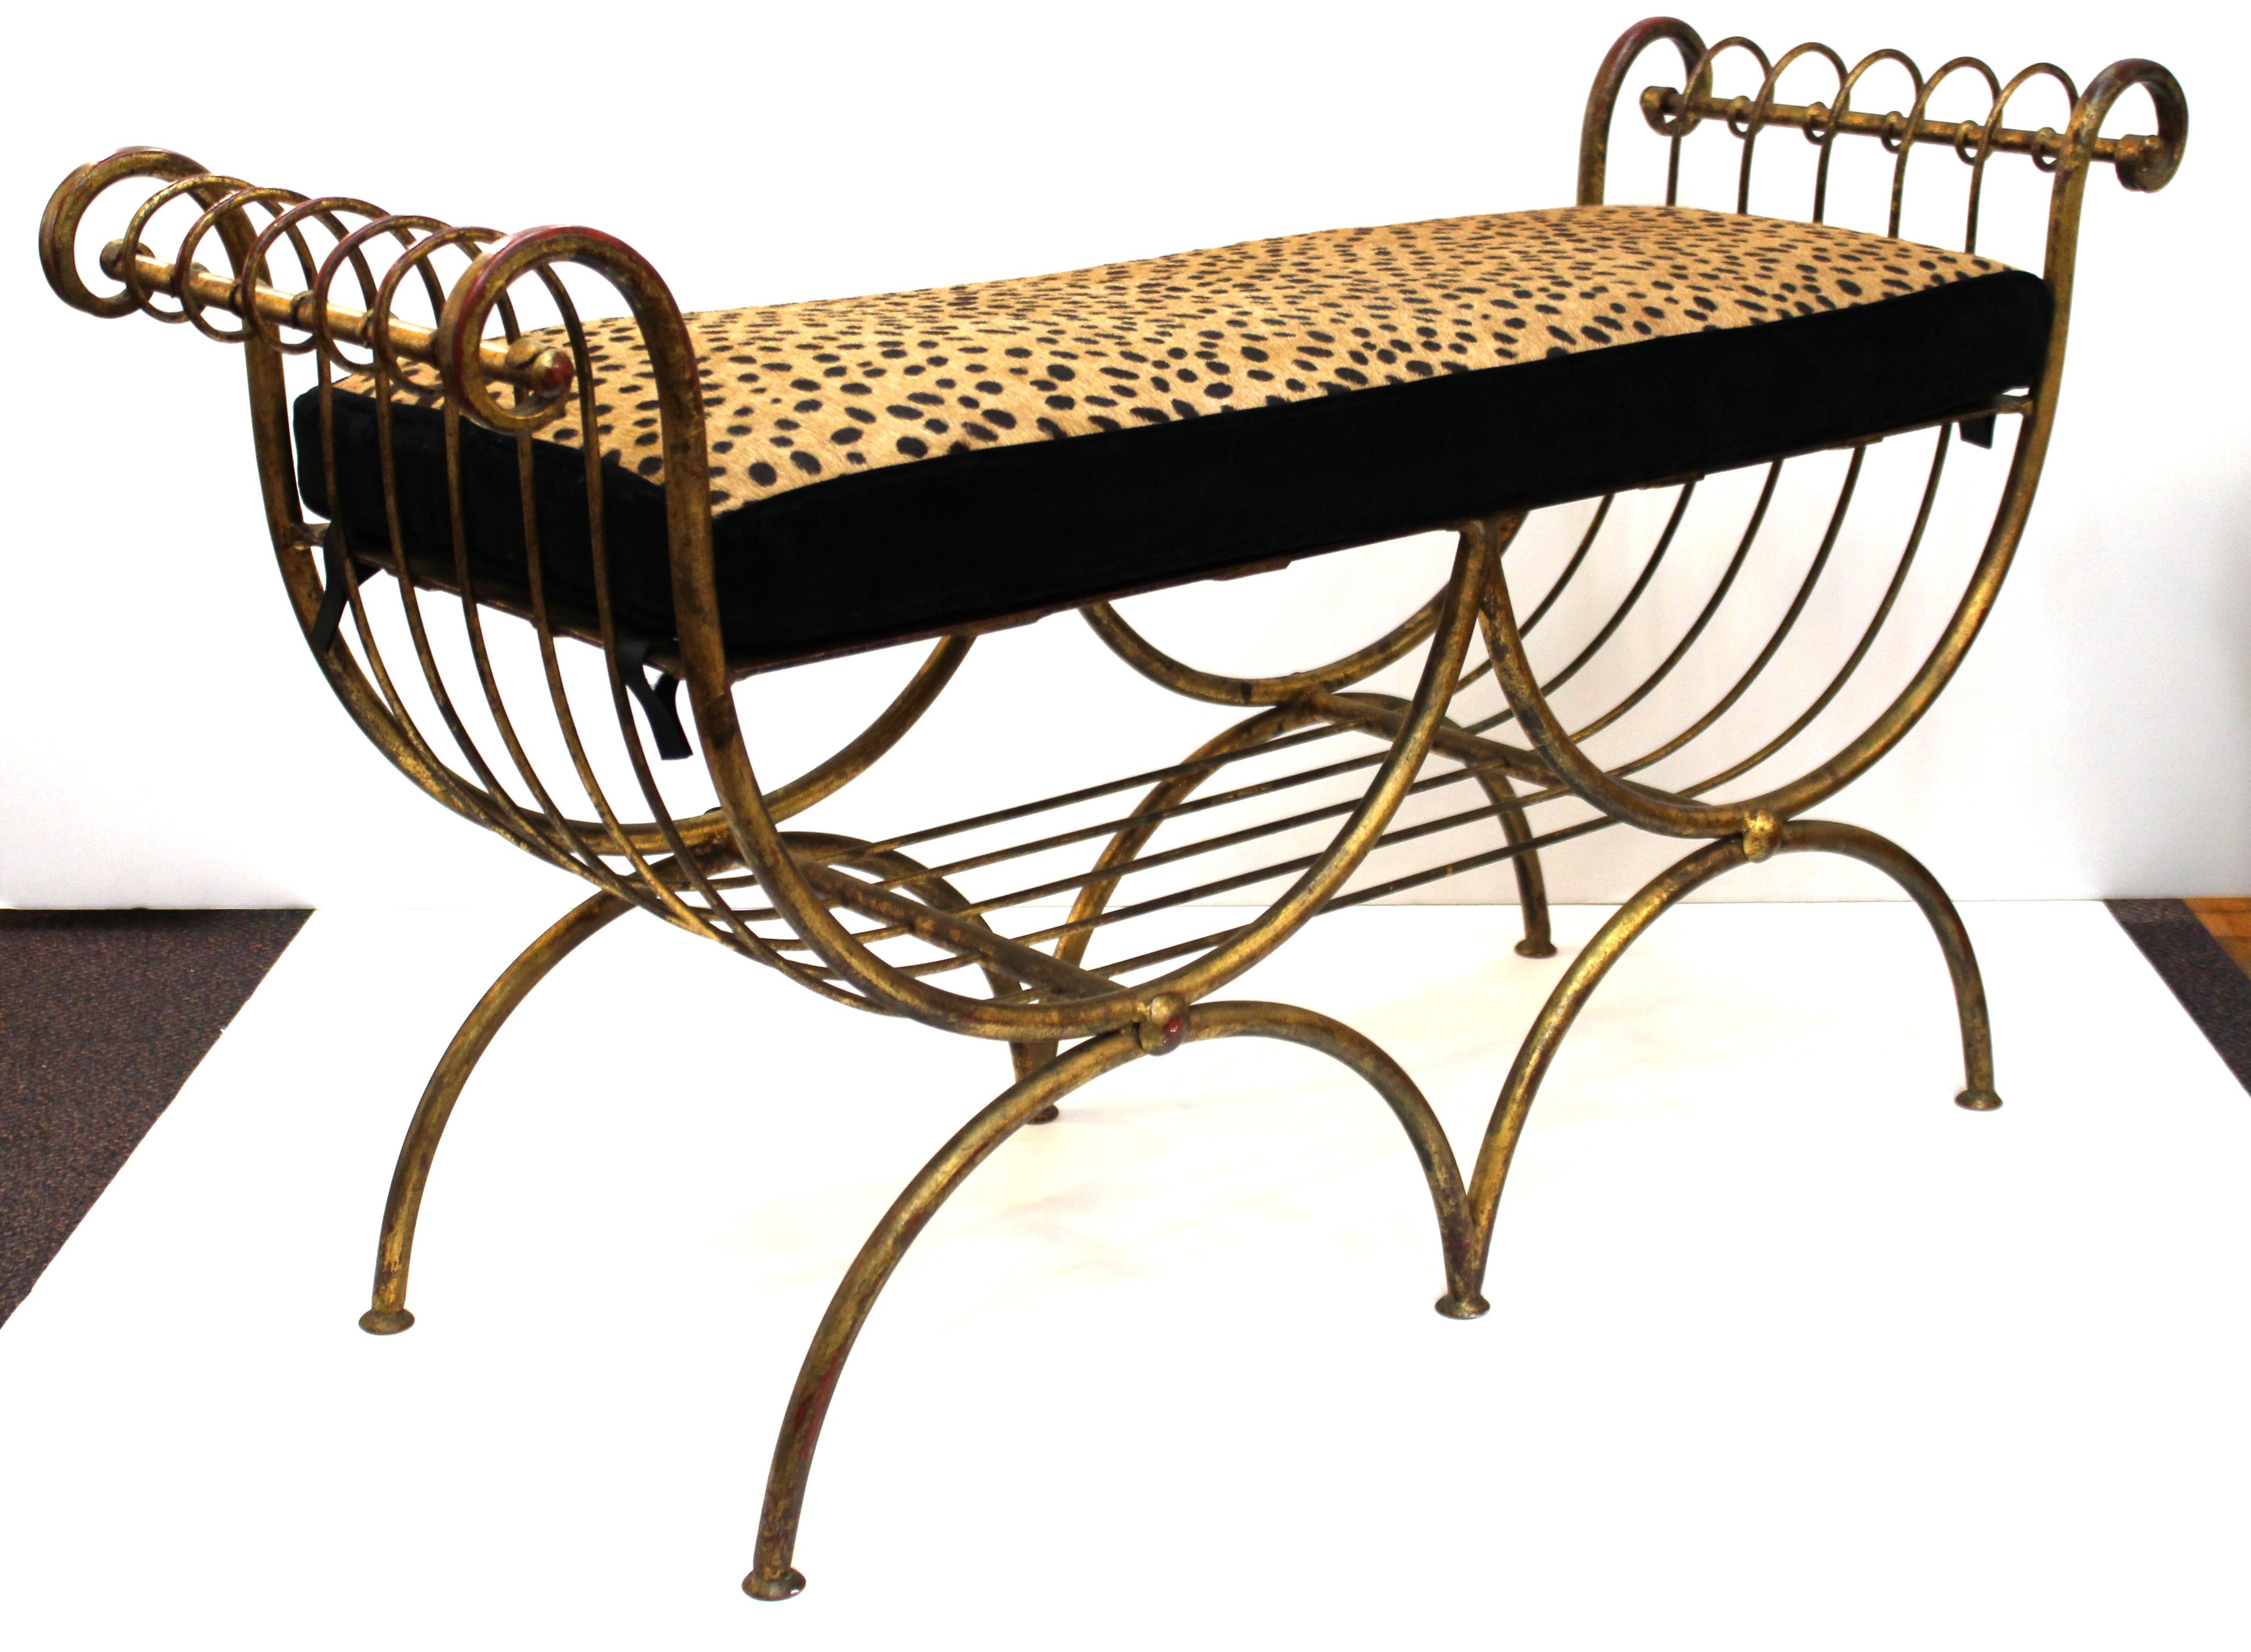 Italian Mid-Century Modern two-seat gilt iron bench, with a new seat cushion upholstered in faux leopard leather. The seat is removable. This piece dates from the 1950s and is in great vintage condition.